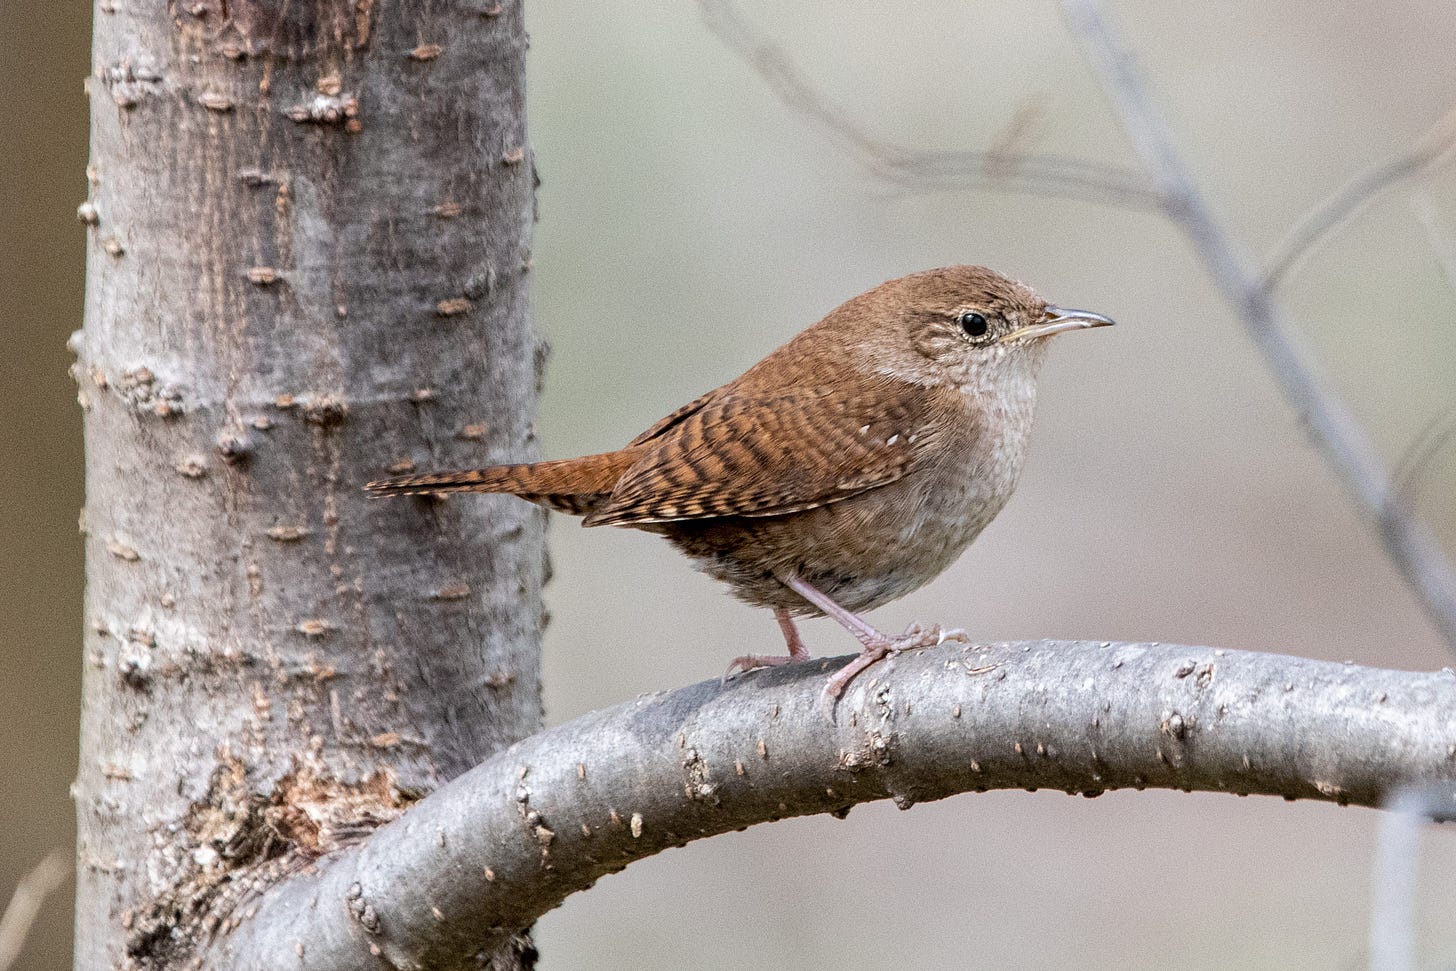 A house wren (brown, no supercilium, barred wings and tail) is perched on a branch